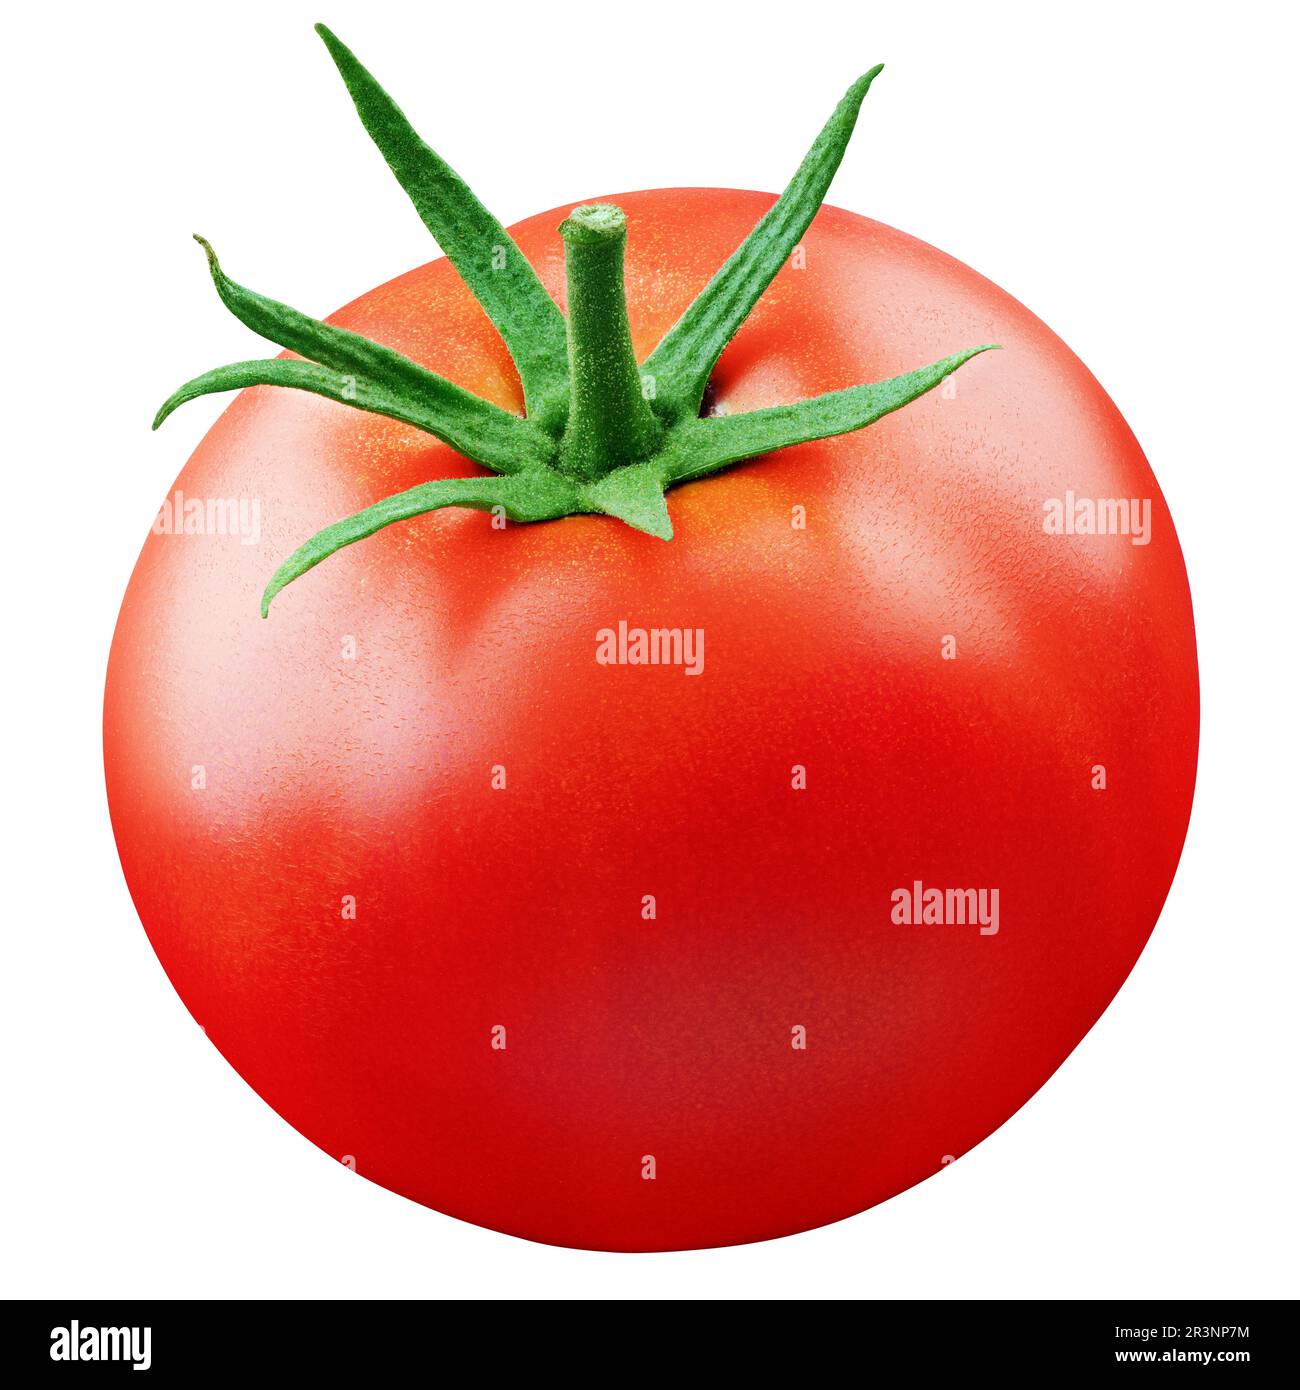 Ripe fresh red tomato with green leaf isolated on white background with clipping path. Full Depth of Field Stock Photo